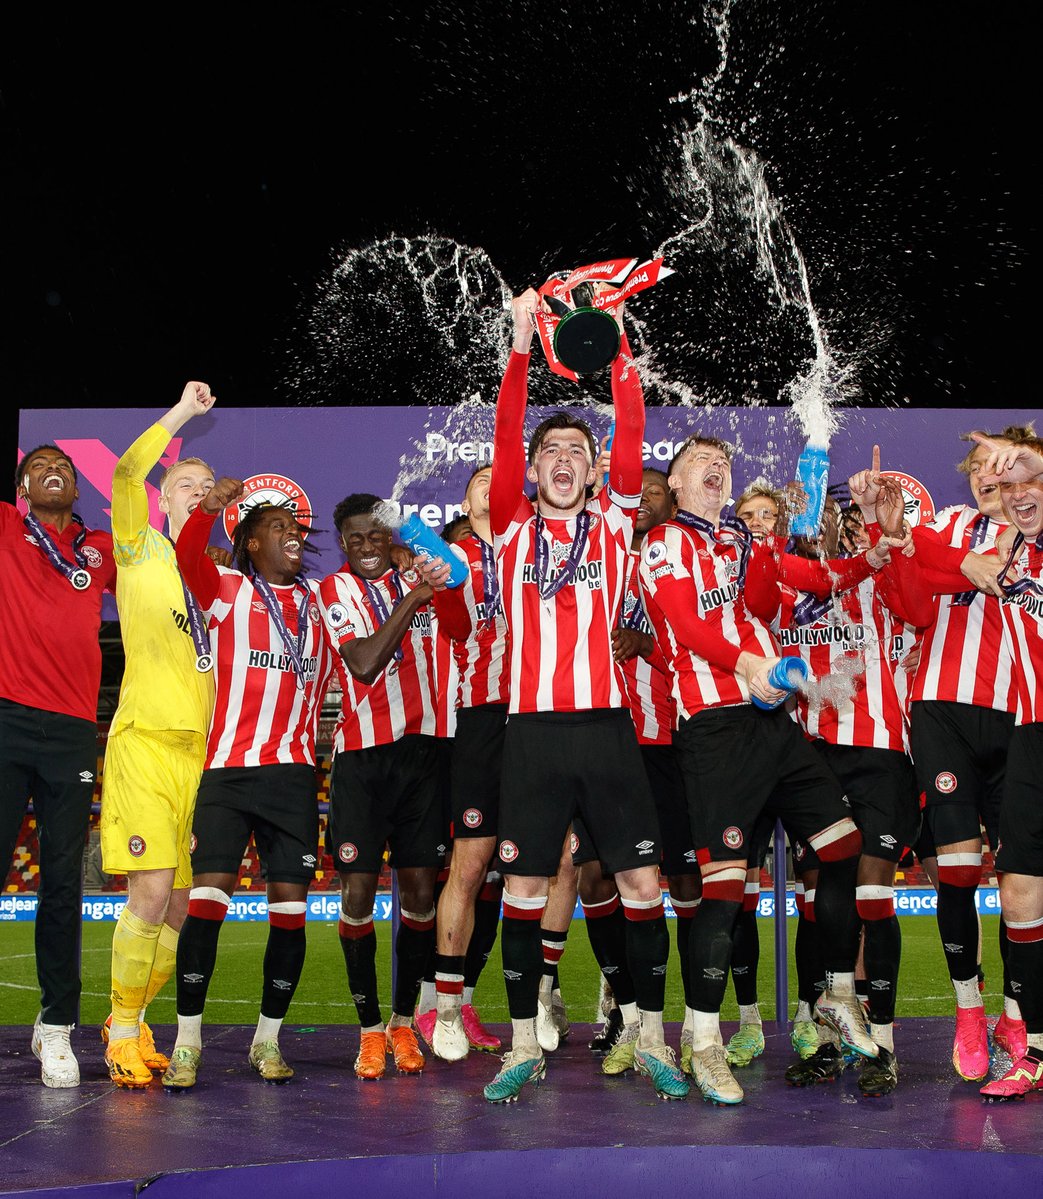 One year ago today 🏆

#BrentfordB were crowned #PLCup champions exactly a year ago today following a 2-1 win over Blackburn Rovers U21s at the Gtech! 

#BrentfordFC